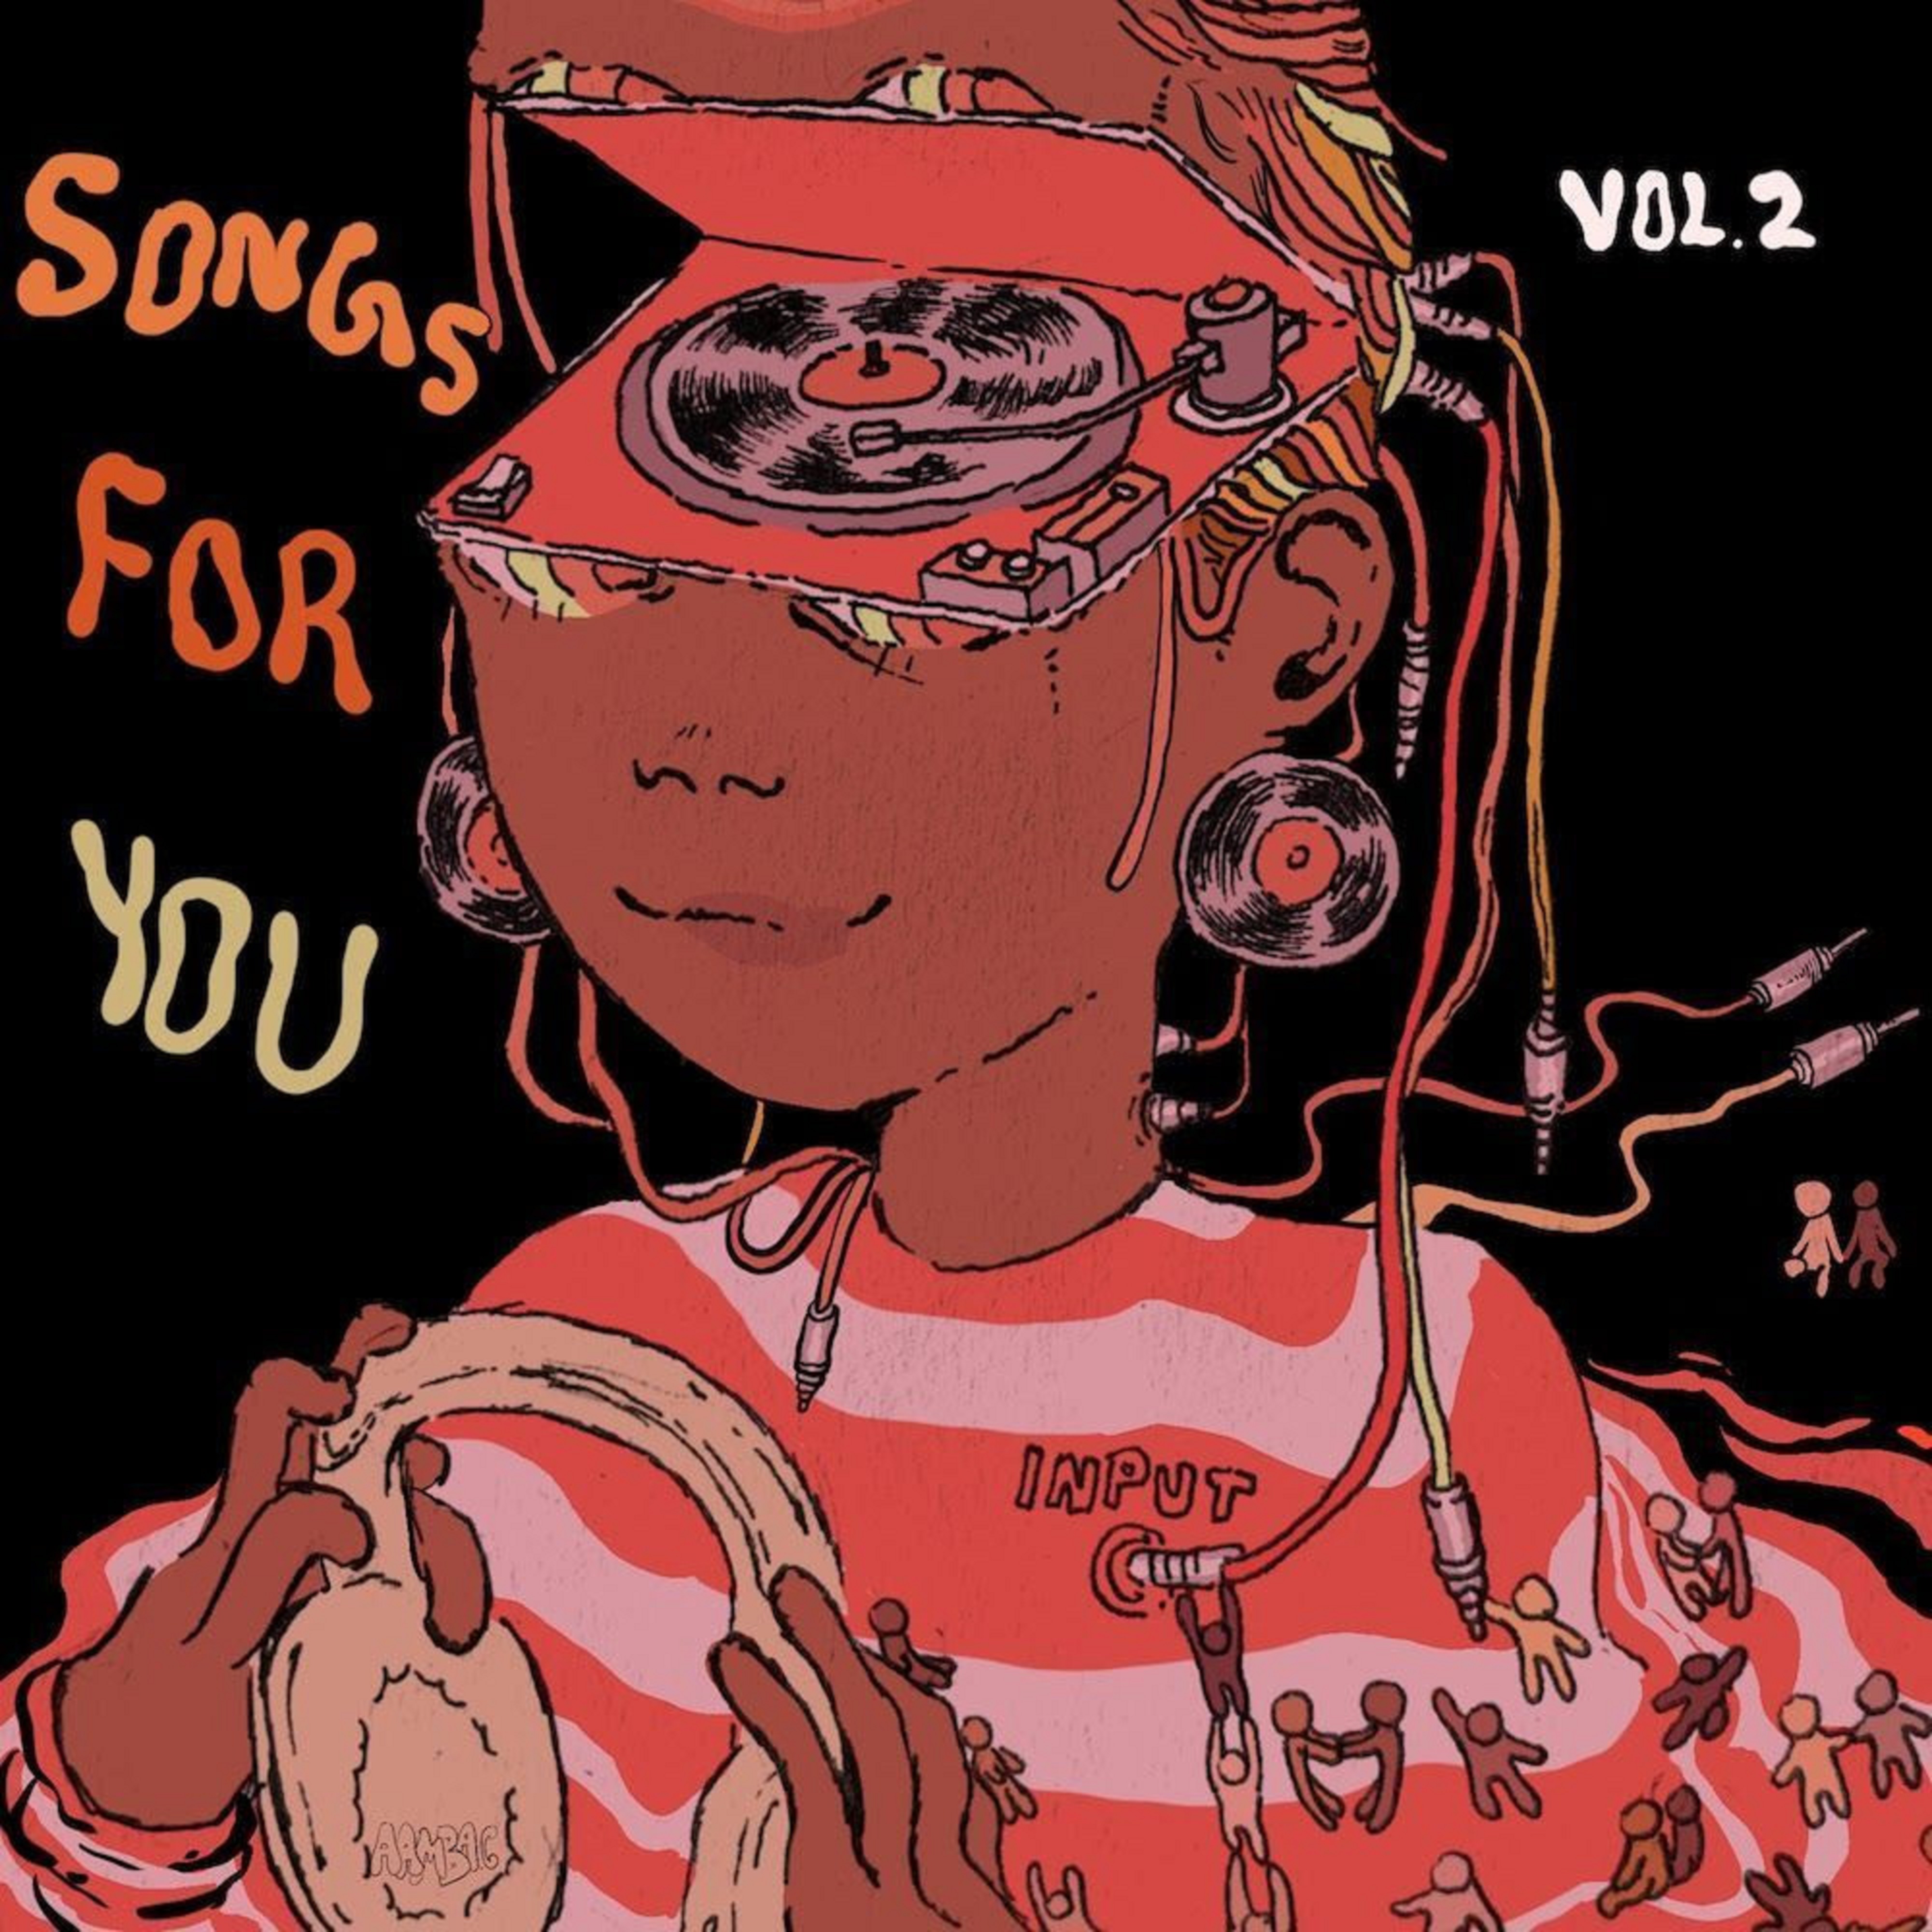 Vans And Record Store Day To Release "Songs For You, Volumes 1 & 2" To Honor The Community Impact Of Black-Owned Record Stores